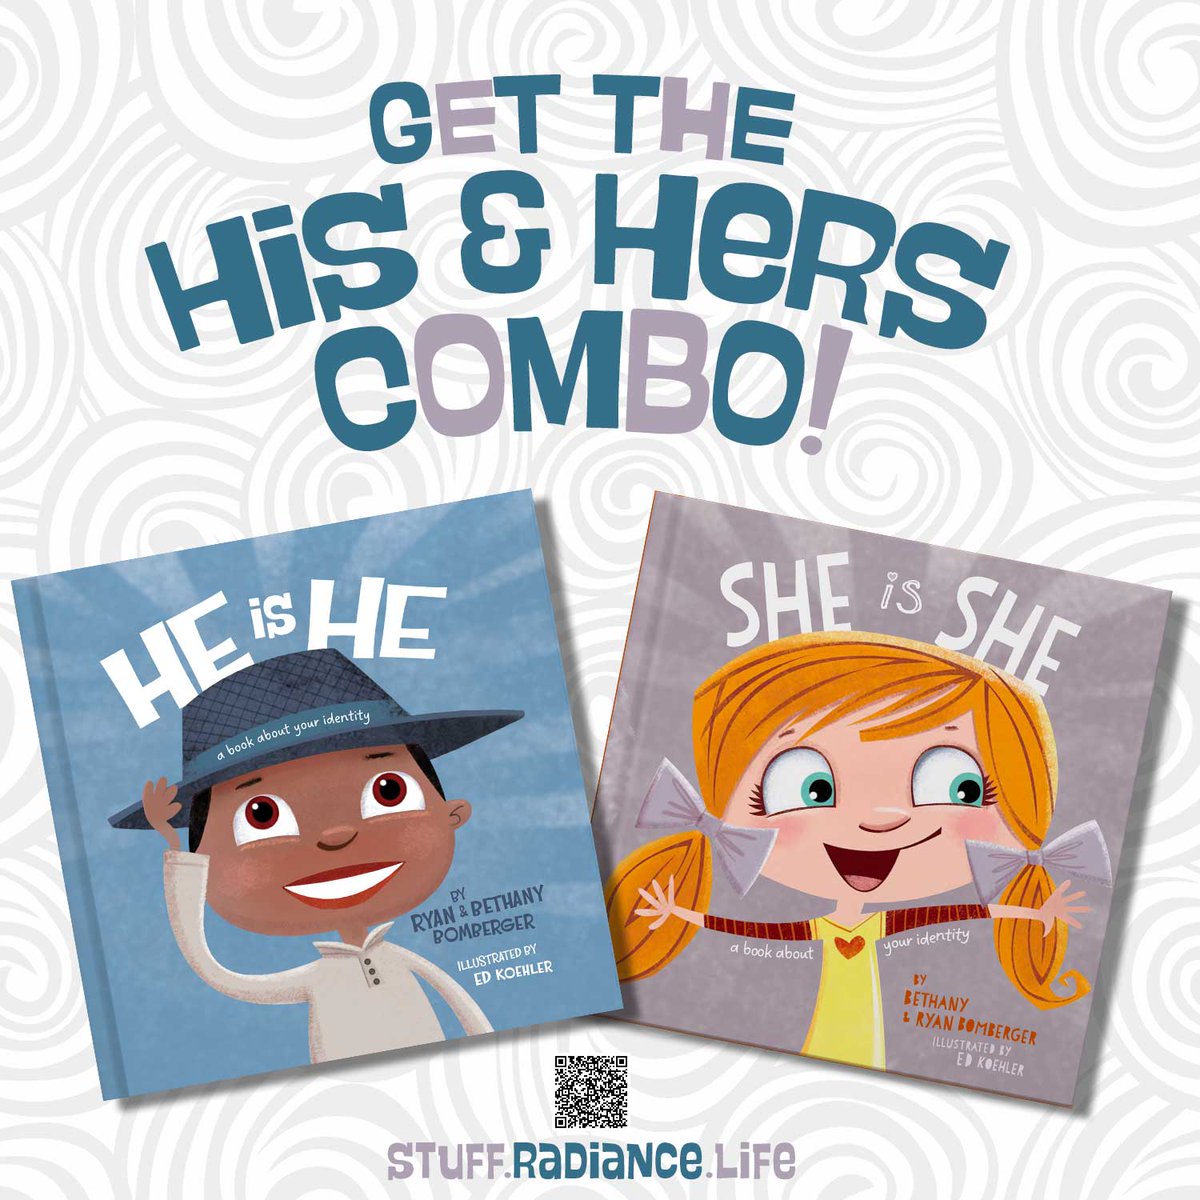 Stop the Gender War on Children! Give the gift of common sense. Get the HIS & HERS COMBO for only $15.99 today! #SuperSaturday #ChildrensBooks #TeachThemYoung stuff.radiance.life